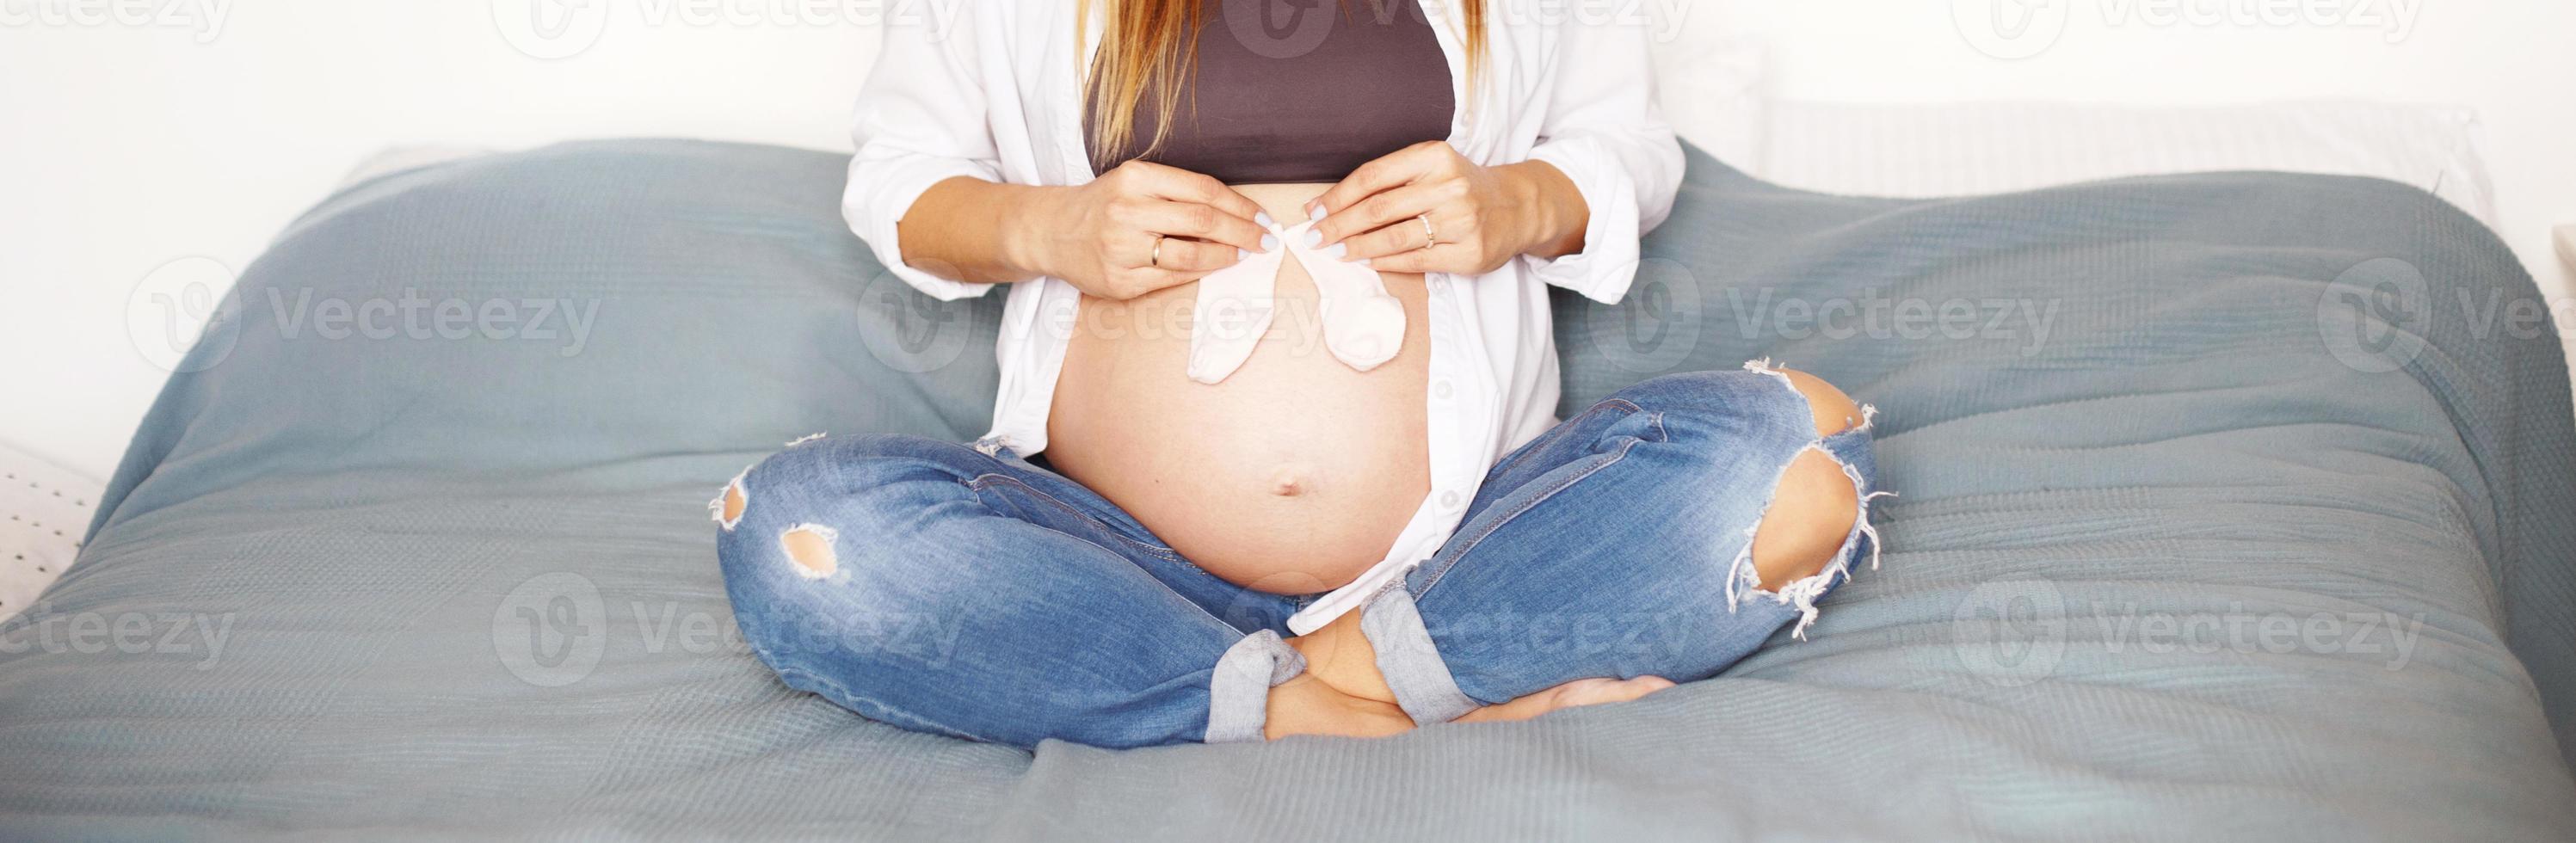 girl sitting on bed in bedroom and holding pink socks near her pregnant belly photo